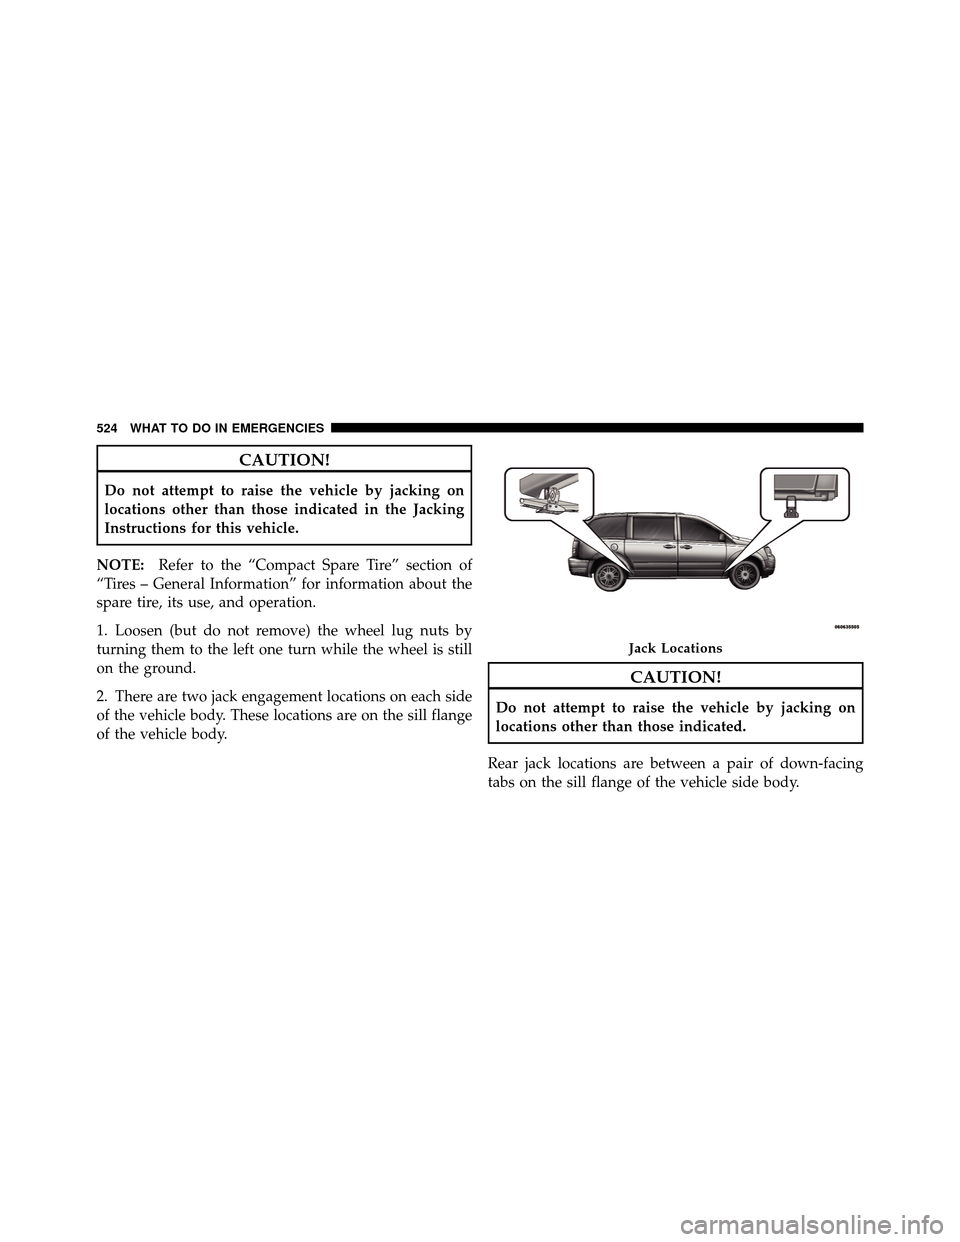 DODGE GRAND CARAVAN 2012 5.G Owners Manual CAUTION!
Do not attempt to raise the vehicle by jacking on
locations other than those indicated in the Jacking
Instructions for this vehicle.
NOTE: Refer to the “Compact Spare Tire” section of
“